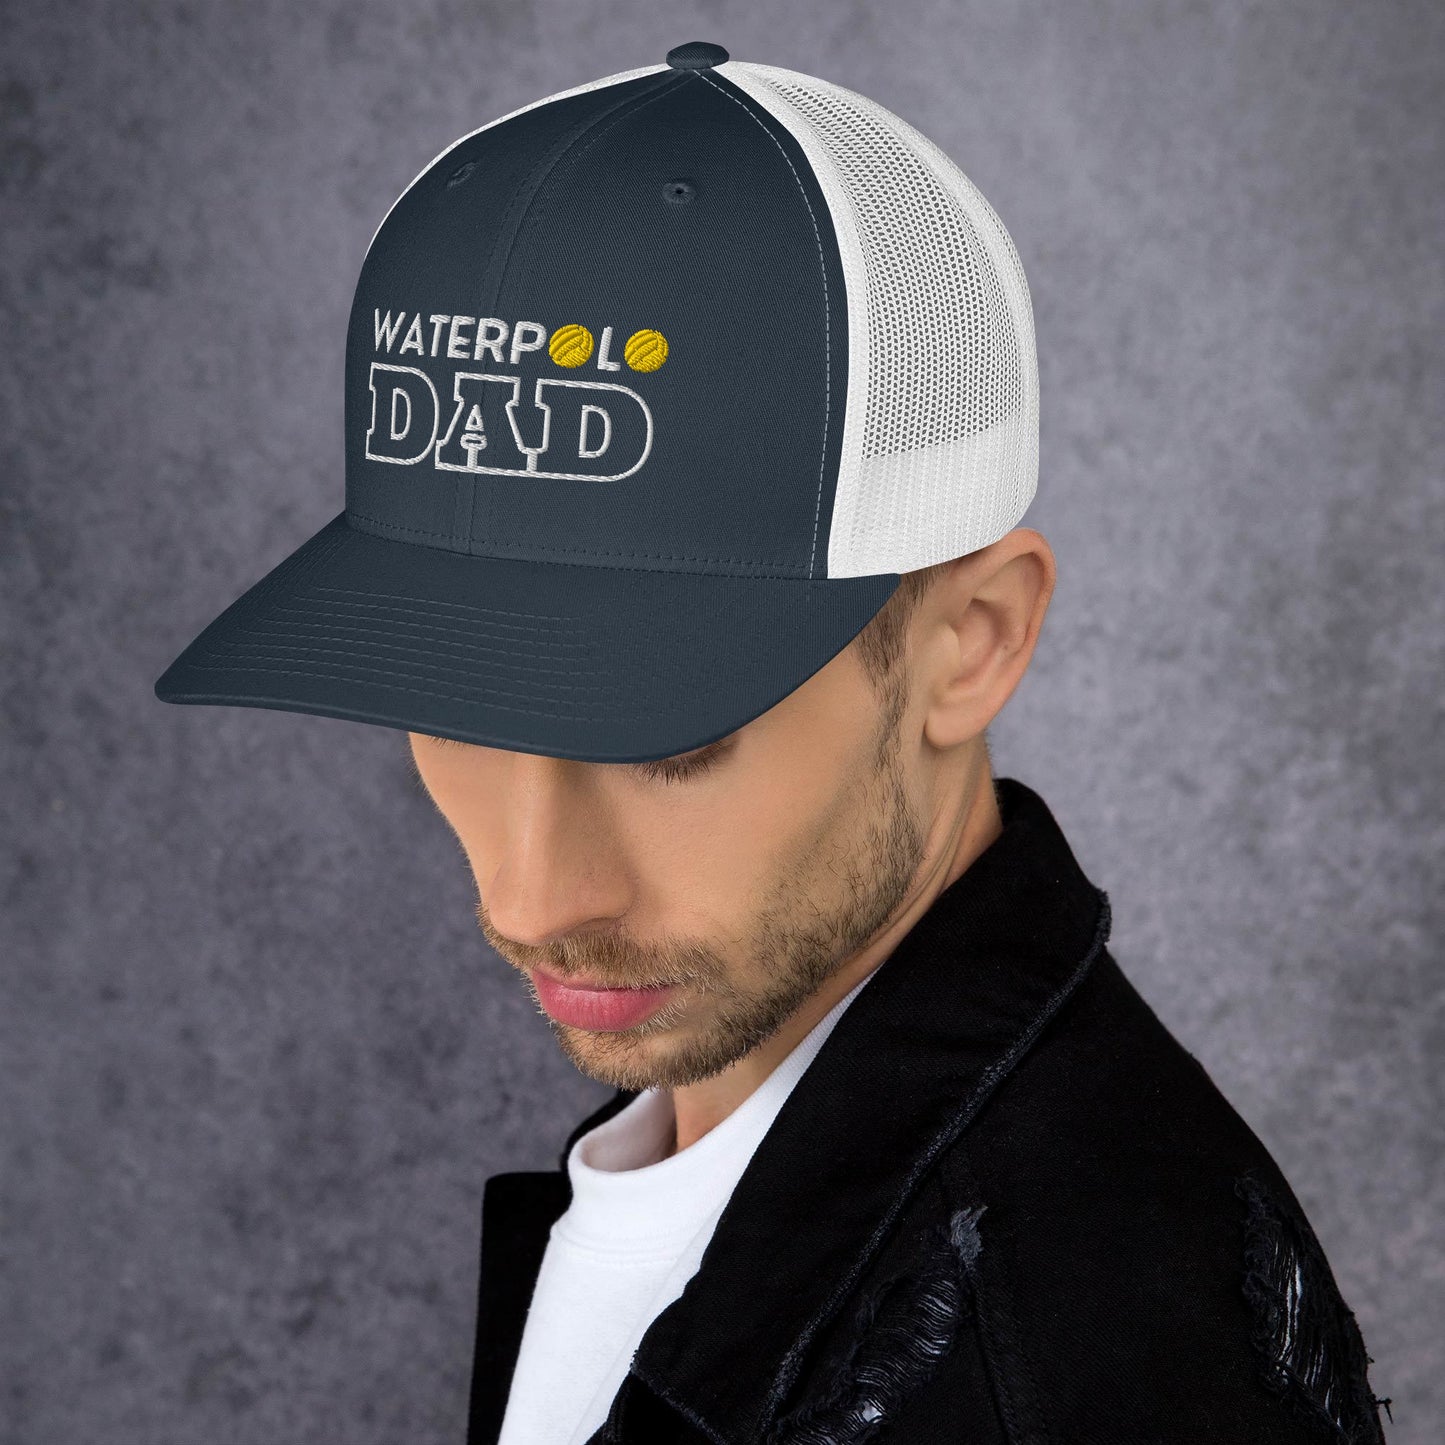 Waterpolo Dad - Embroidered Retro Trucker Hat | Yupoong 6606